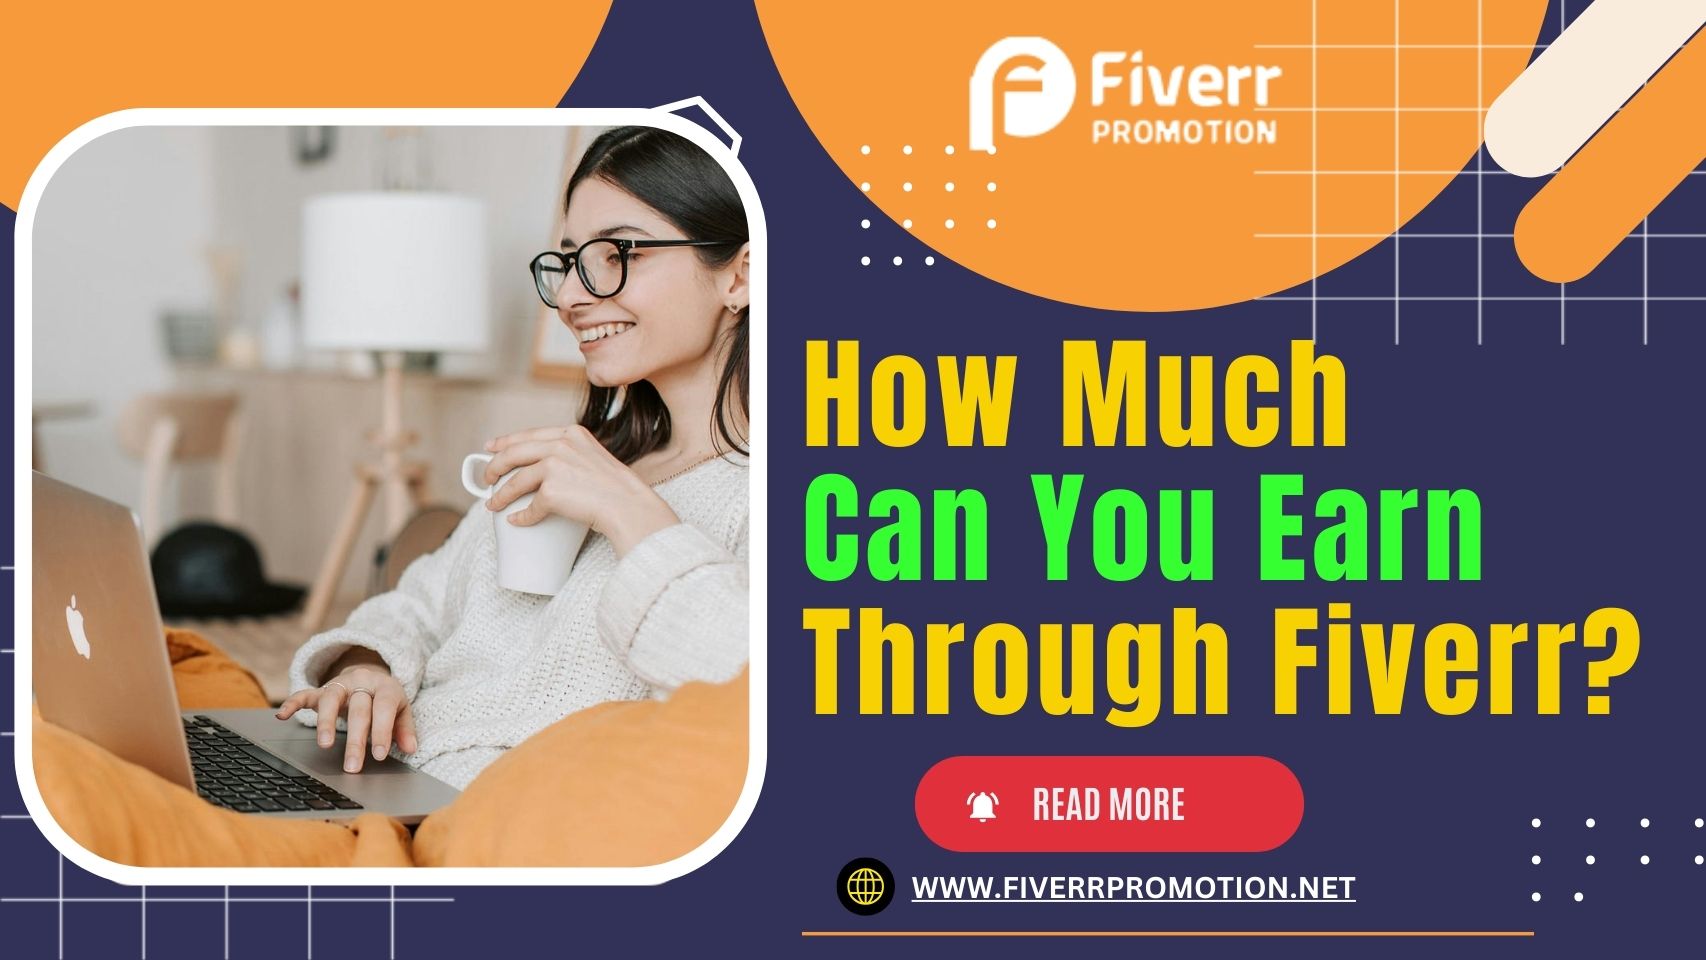 How much can you earn through Fiverr?